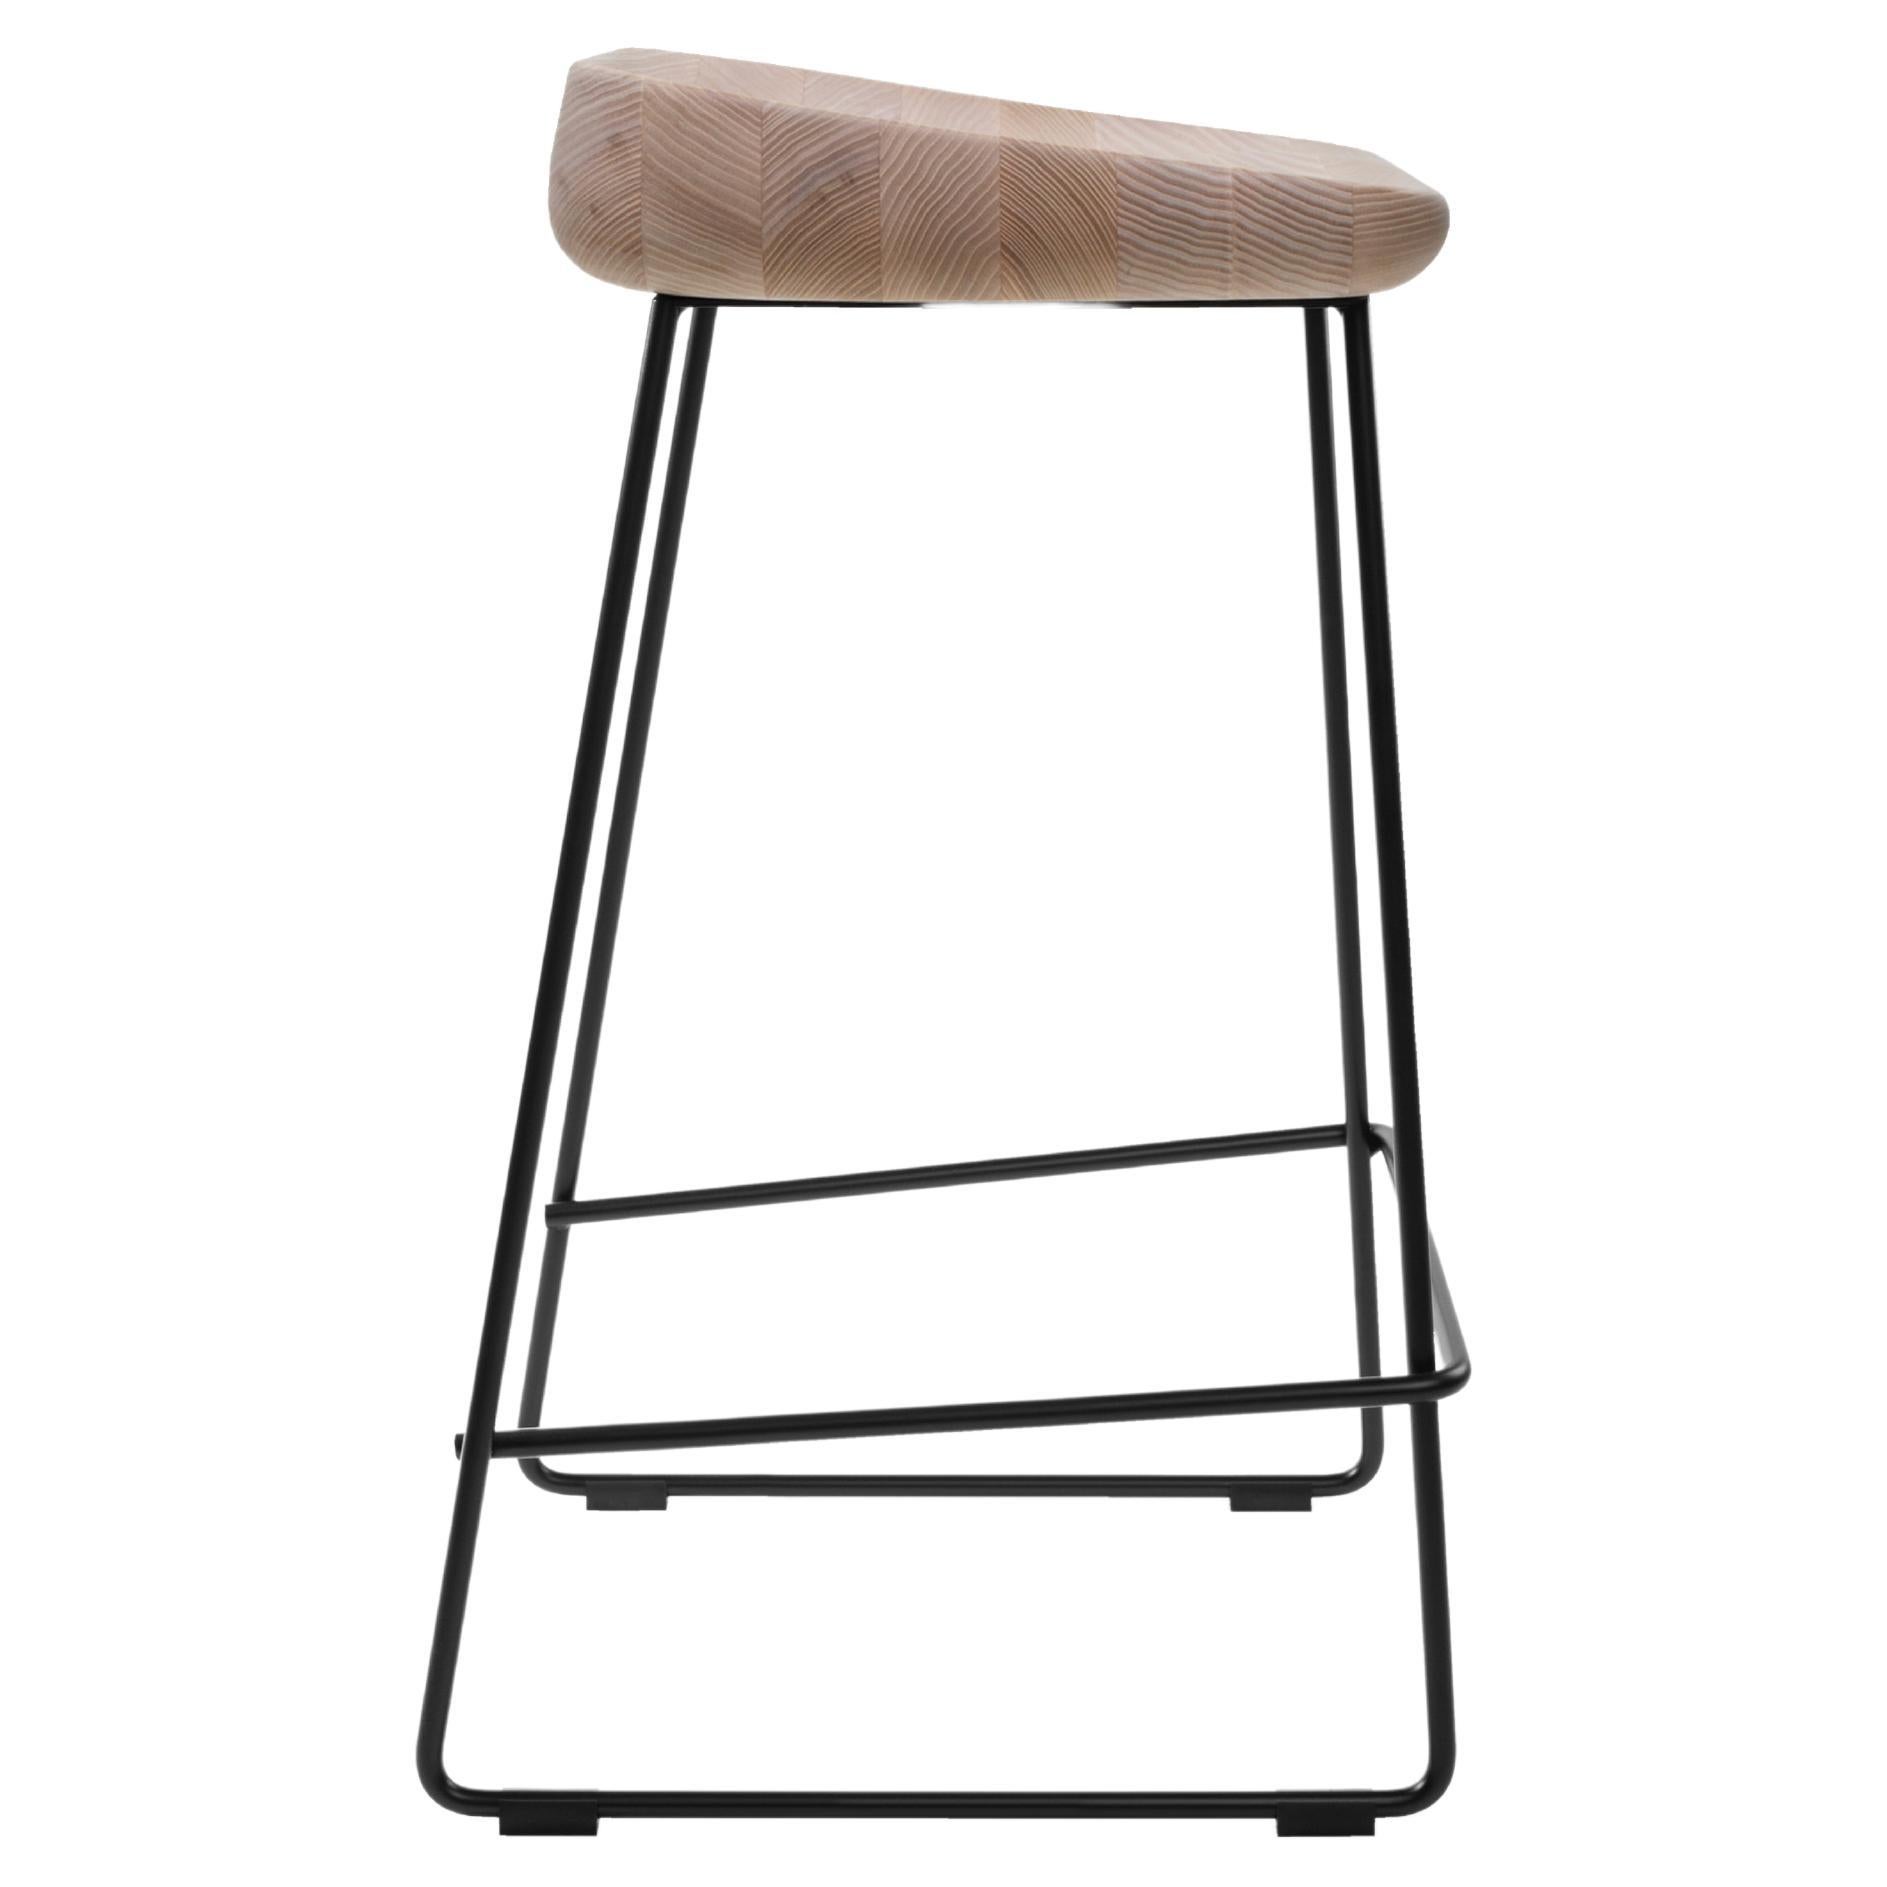 What is a counter height stool?